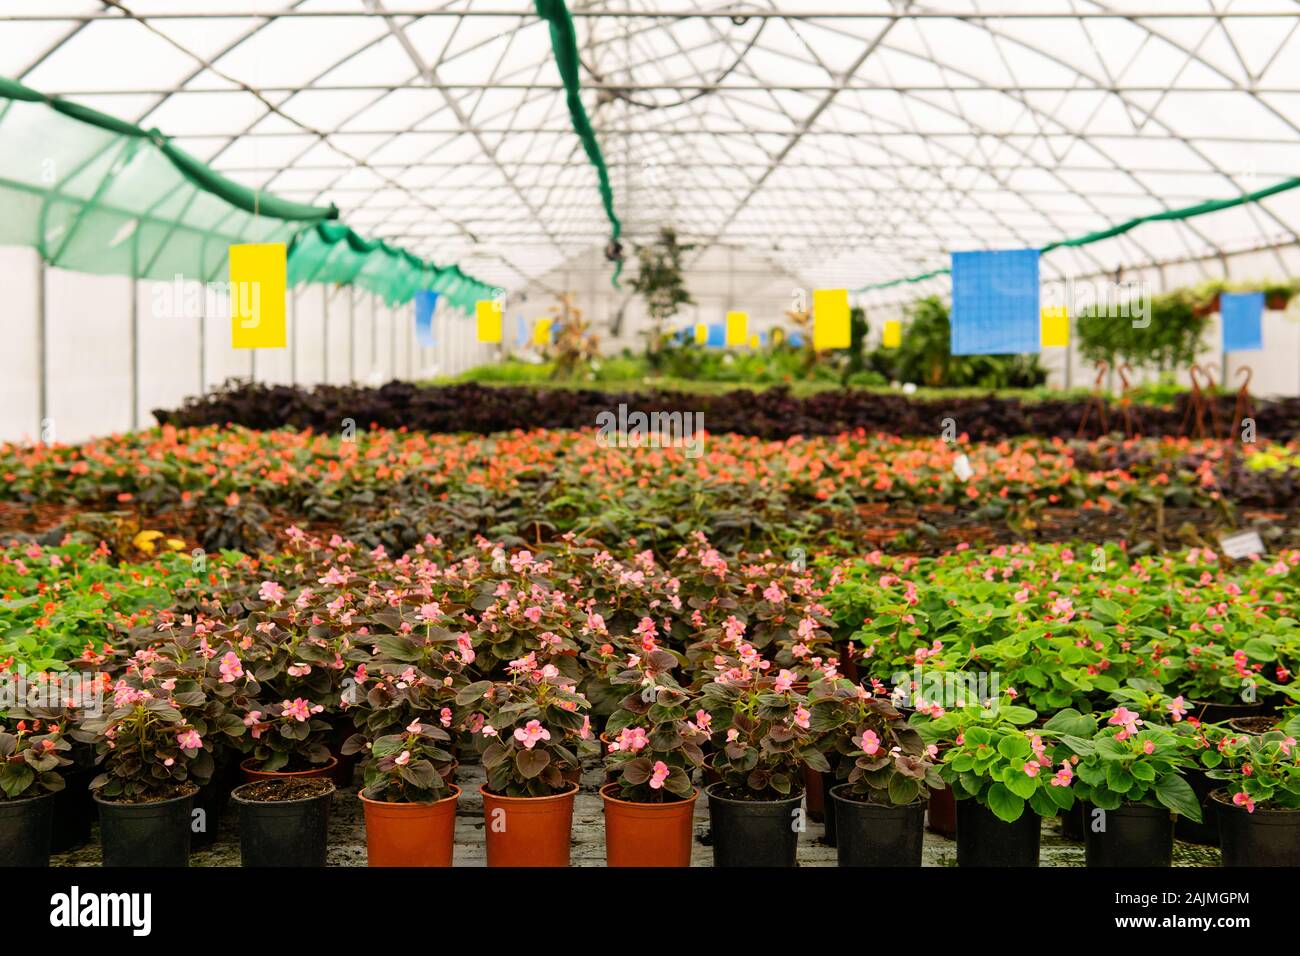 interior of a commercial greenhouse in which indoor flowers are grown Stock Photo